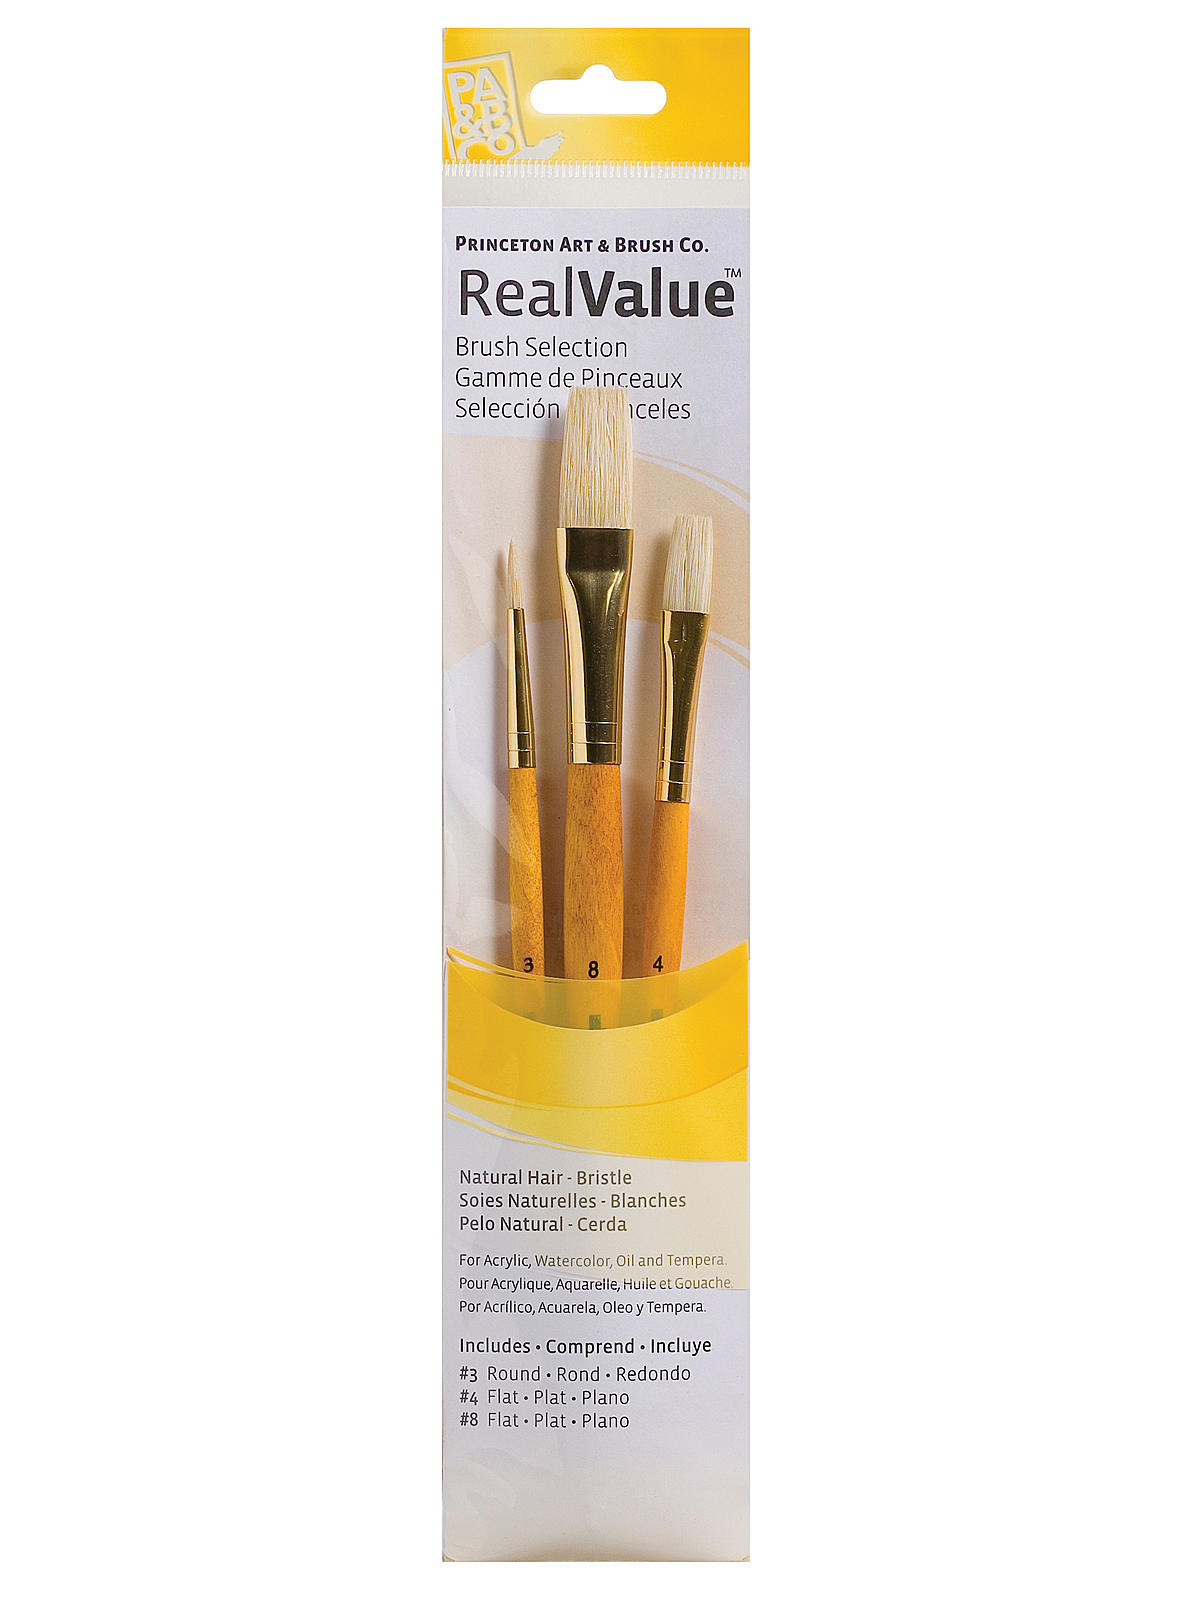 Real Value Series 9000 Yellow Handle Brush Sets 9103 Set Of 3